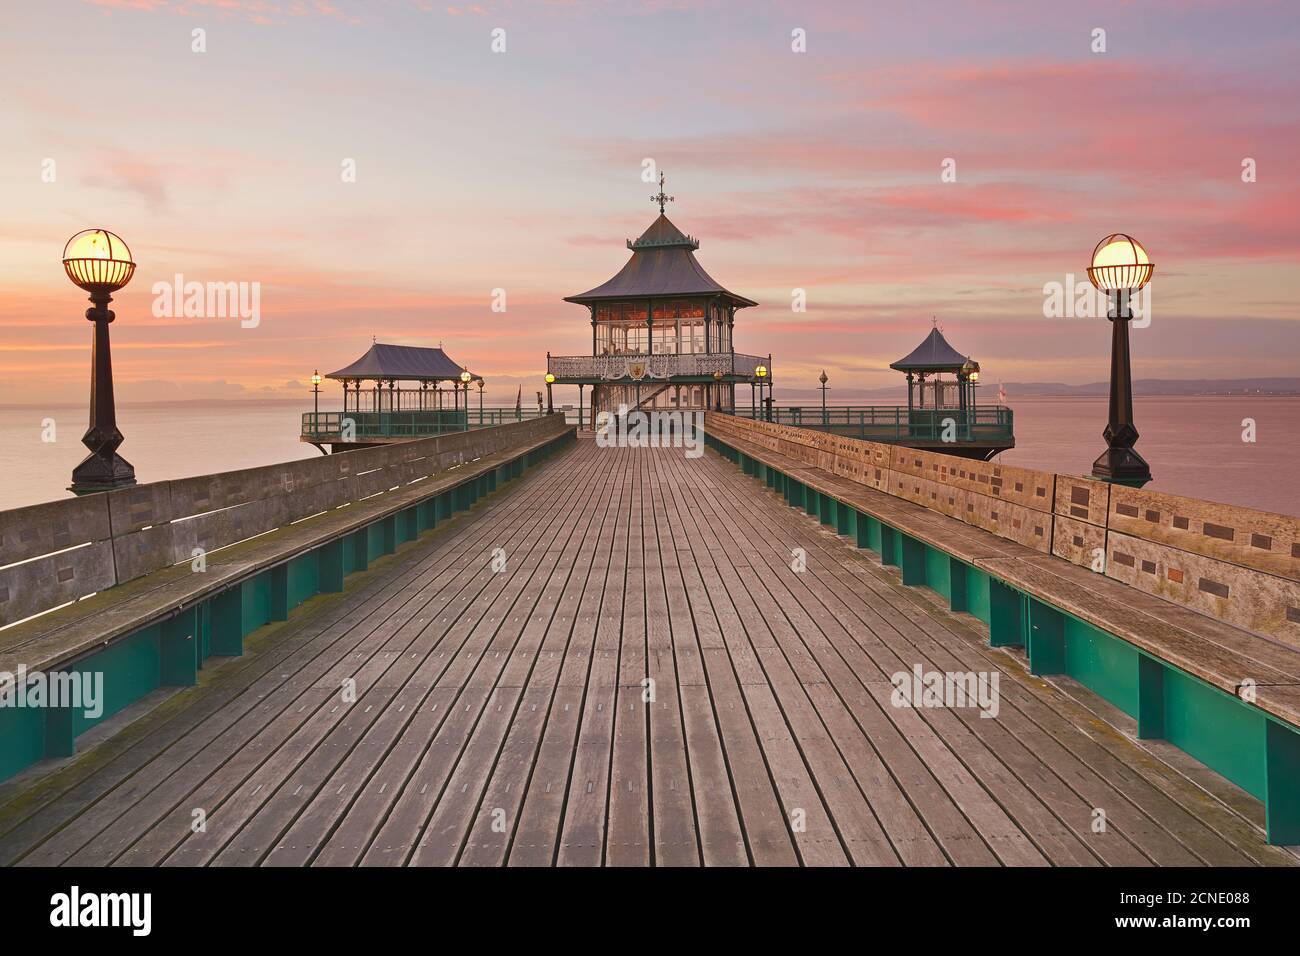 A dusk view of Clevedon Pier, in Clevedon, on the Bristol Channel coast of Somerset, England, United Kingdom, Europe Stock Photo